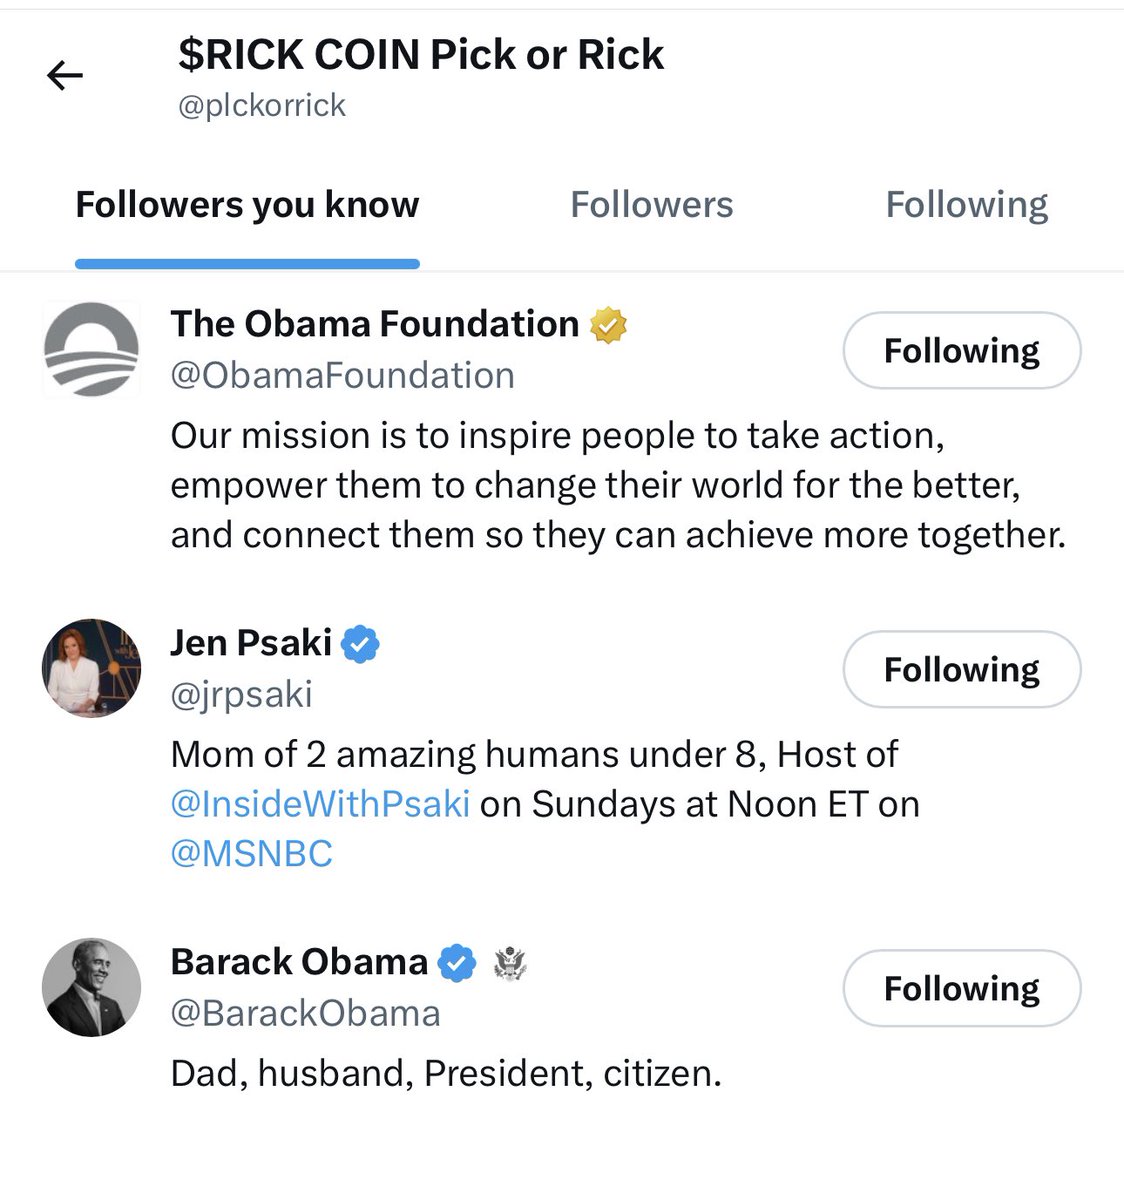 What an odd page to follow. 

Jen Psaki, Obama, and the Obama Foundation follow this crypto account.